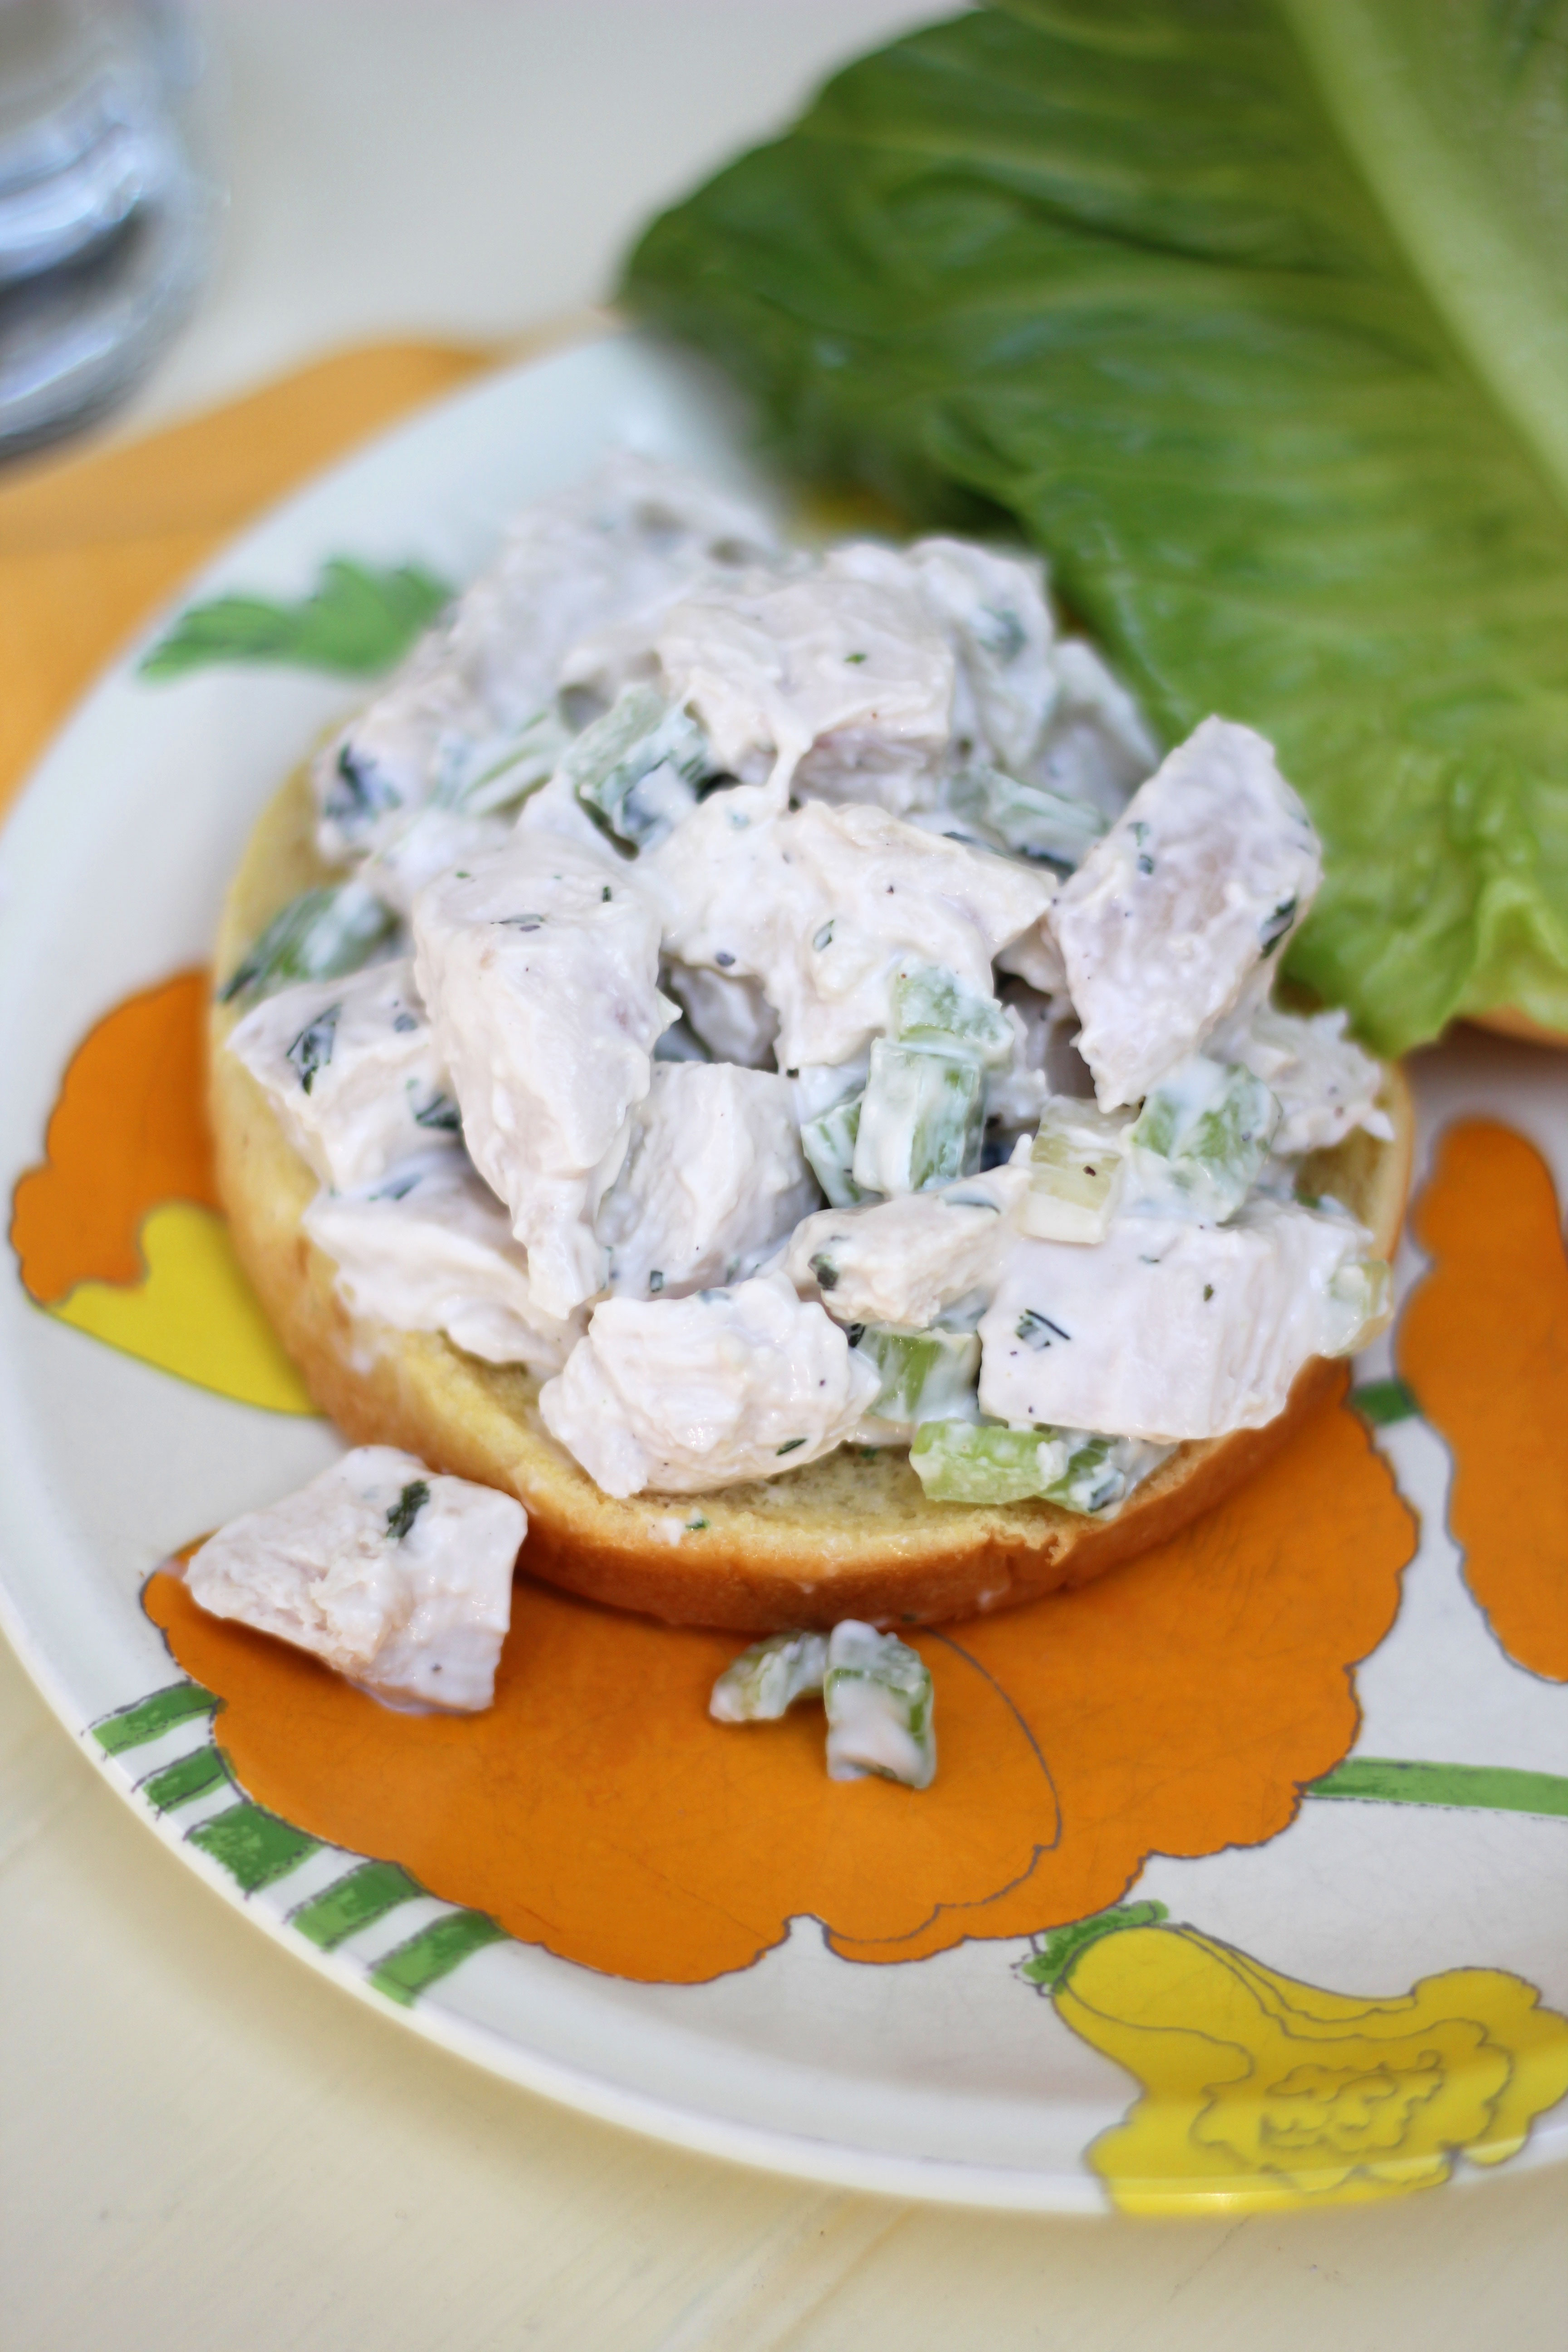 Upgrade your lunch with this super easy homemade chicken salad recipe that packs major taste! Put it on your favorite bread with crispy lettuce and enjoy! 